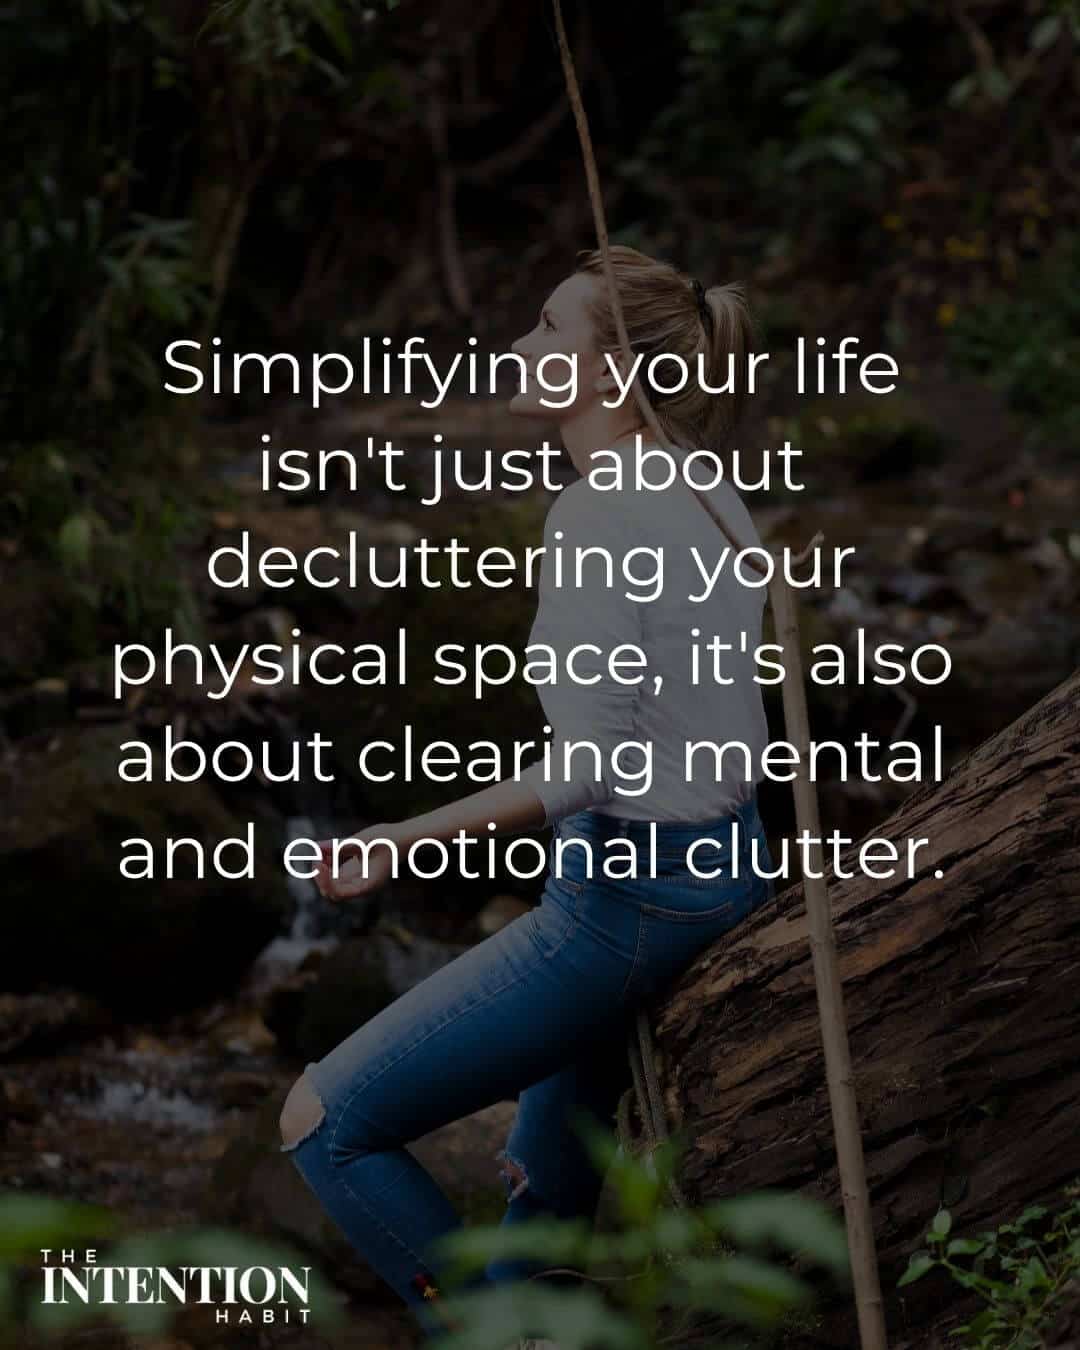 simple living quote - simplifying your life isn't just about decluttering your physical space, it's also about clearing mental and emotional clutter